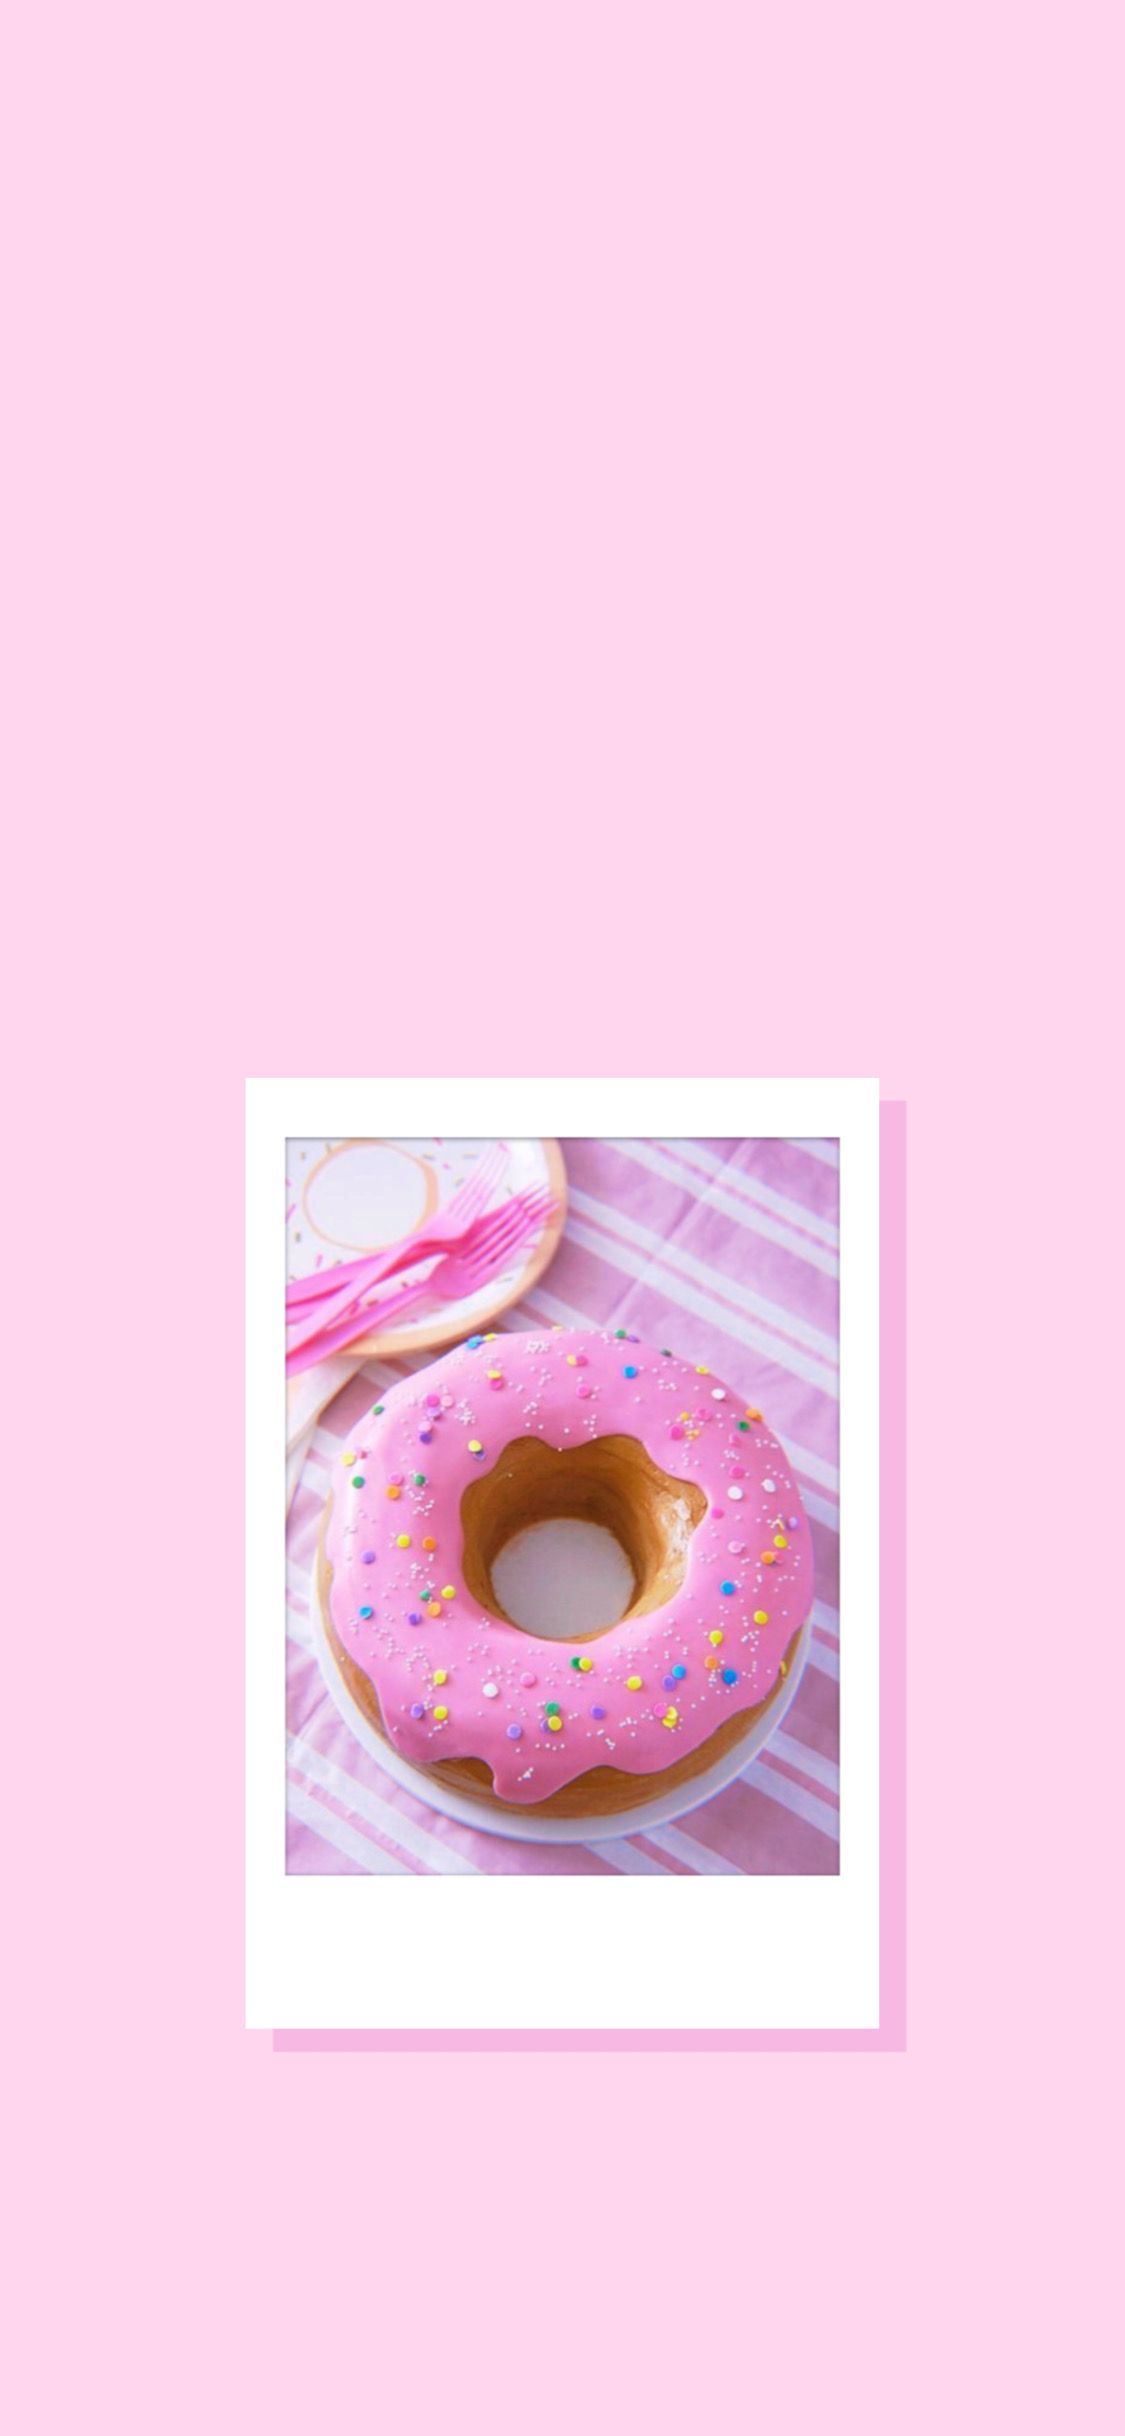 Cute ios 16.3 Wallpapers : Sleeping Donut Wallpaper - Idea Wallpapers , iPhone  Wallpapers,Color Schemes